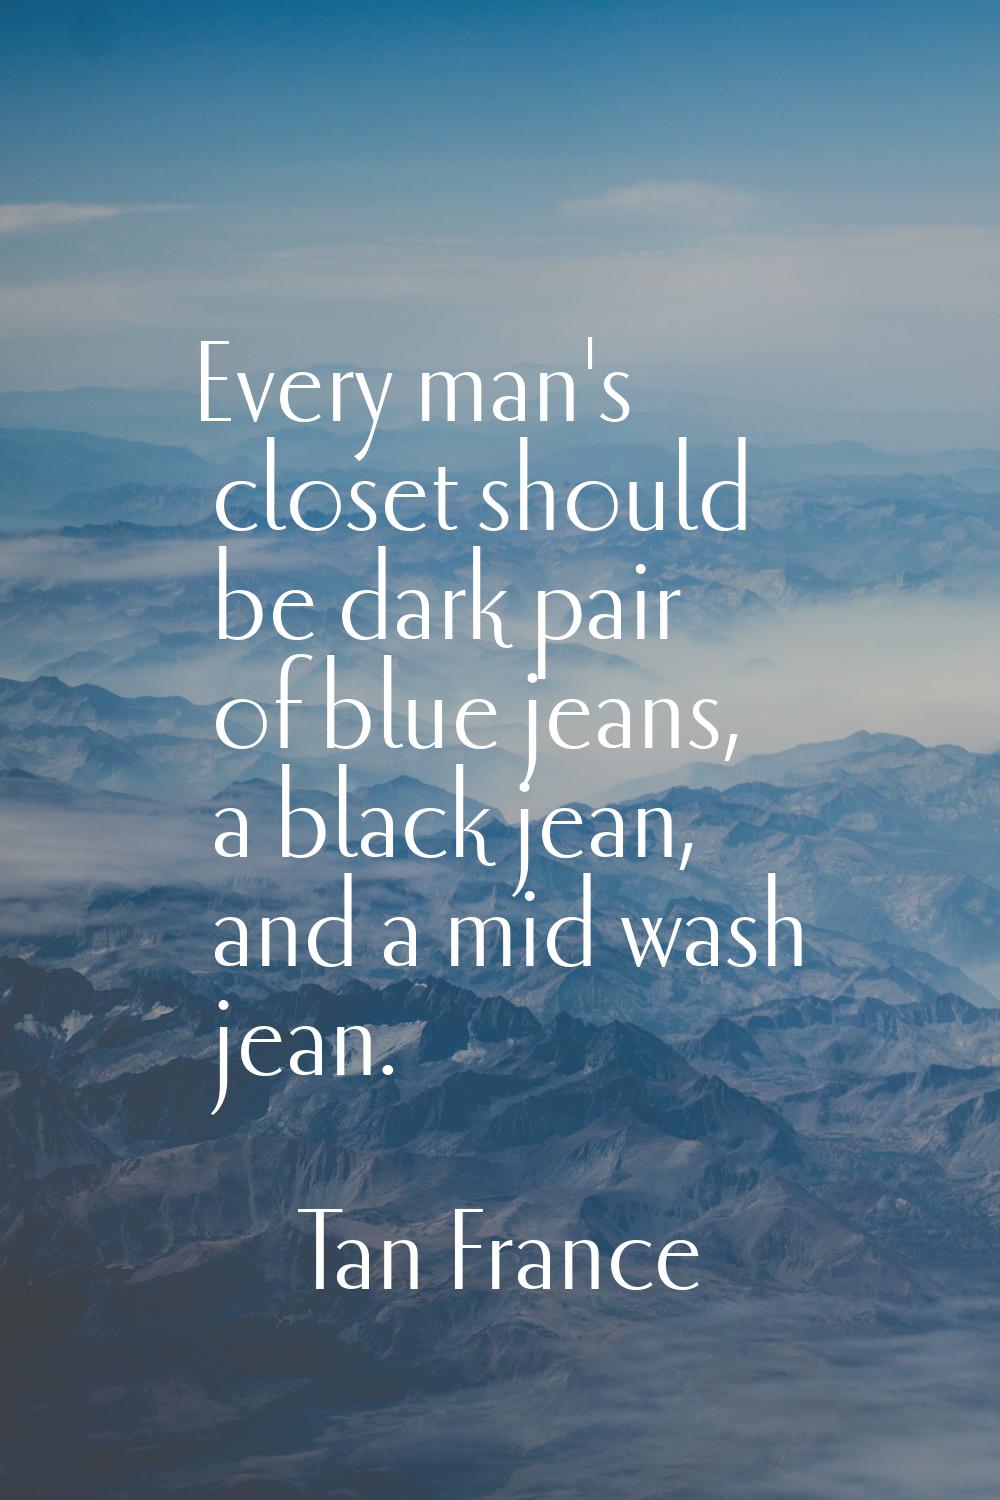 Every man's closet should be dark pair of blue jeans, a black jean, and a mid wash jean.